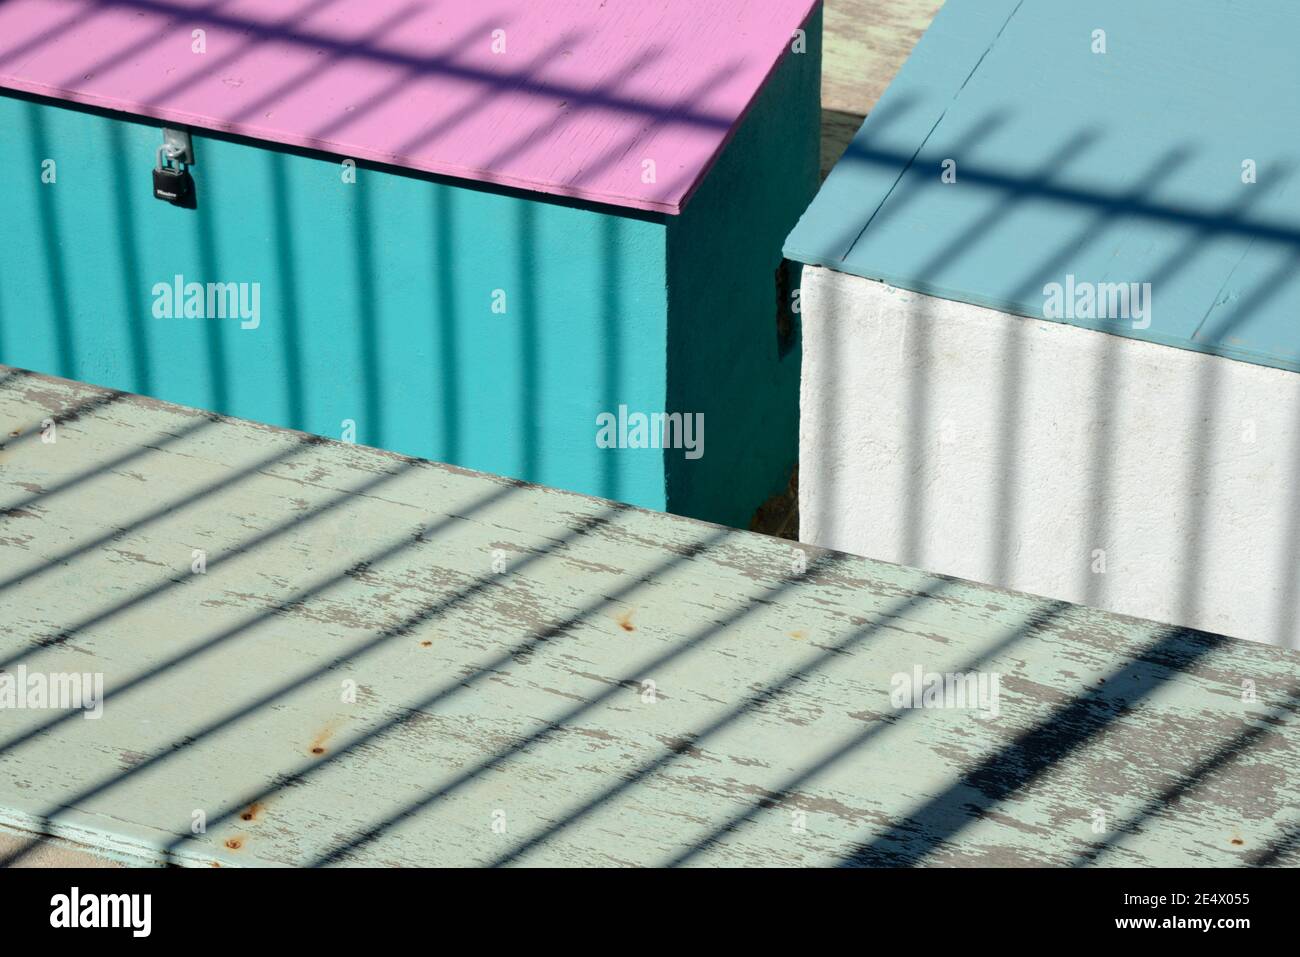 Geometric Minimalism or Colourful Shapes on Colourful Sheds & Shadow Patterns or Pattern of Railings Stock Photo